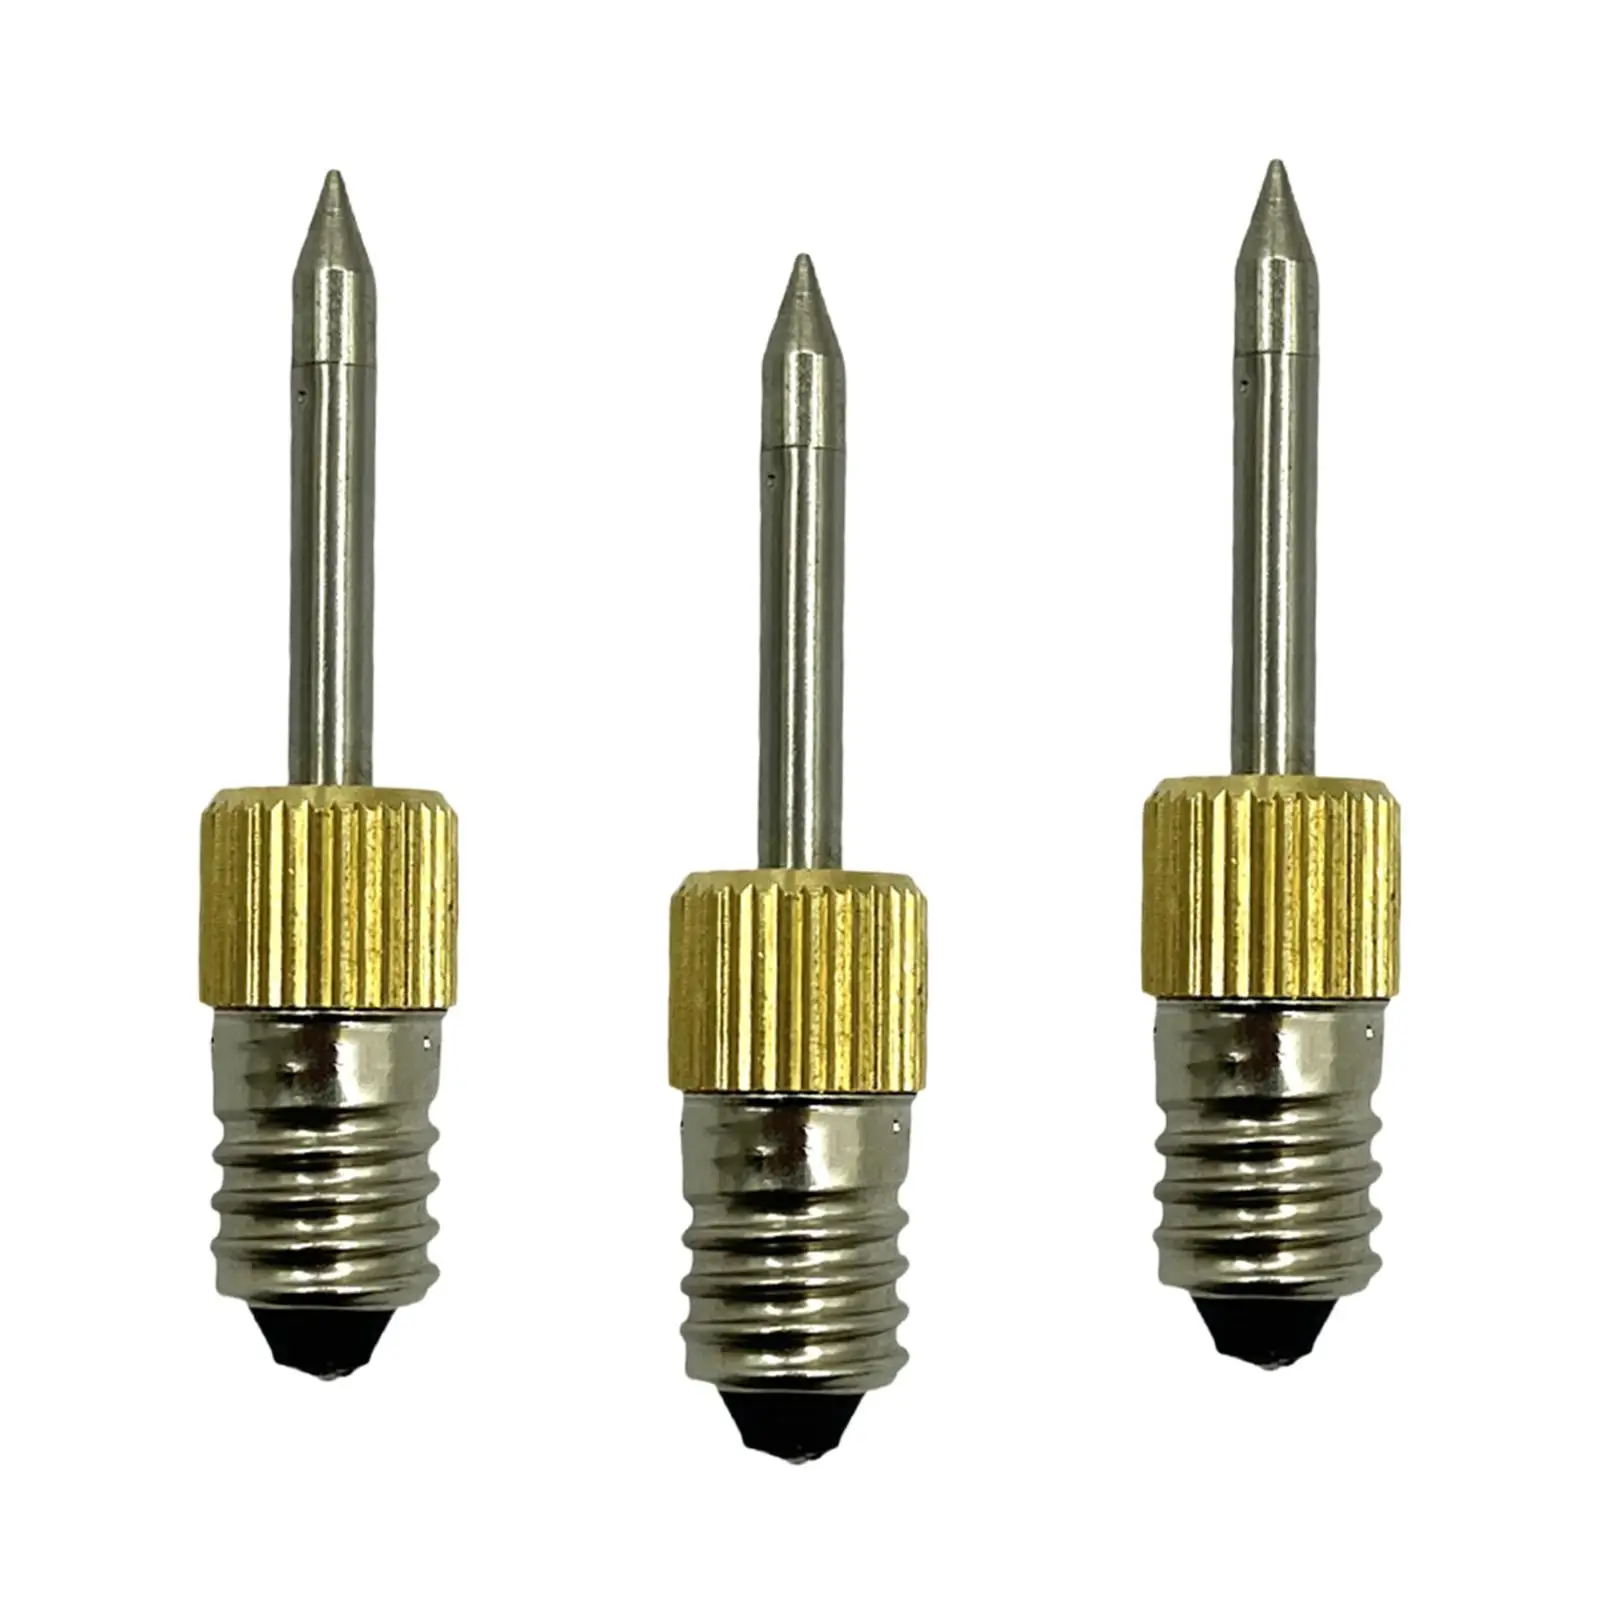 Replacement Soldering Tips Threaded Soldering Head Soldering Iron Tips Welding Soldering Tips for E10 Interface Soldering